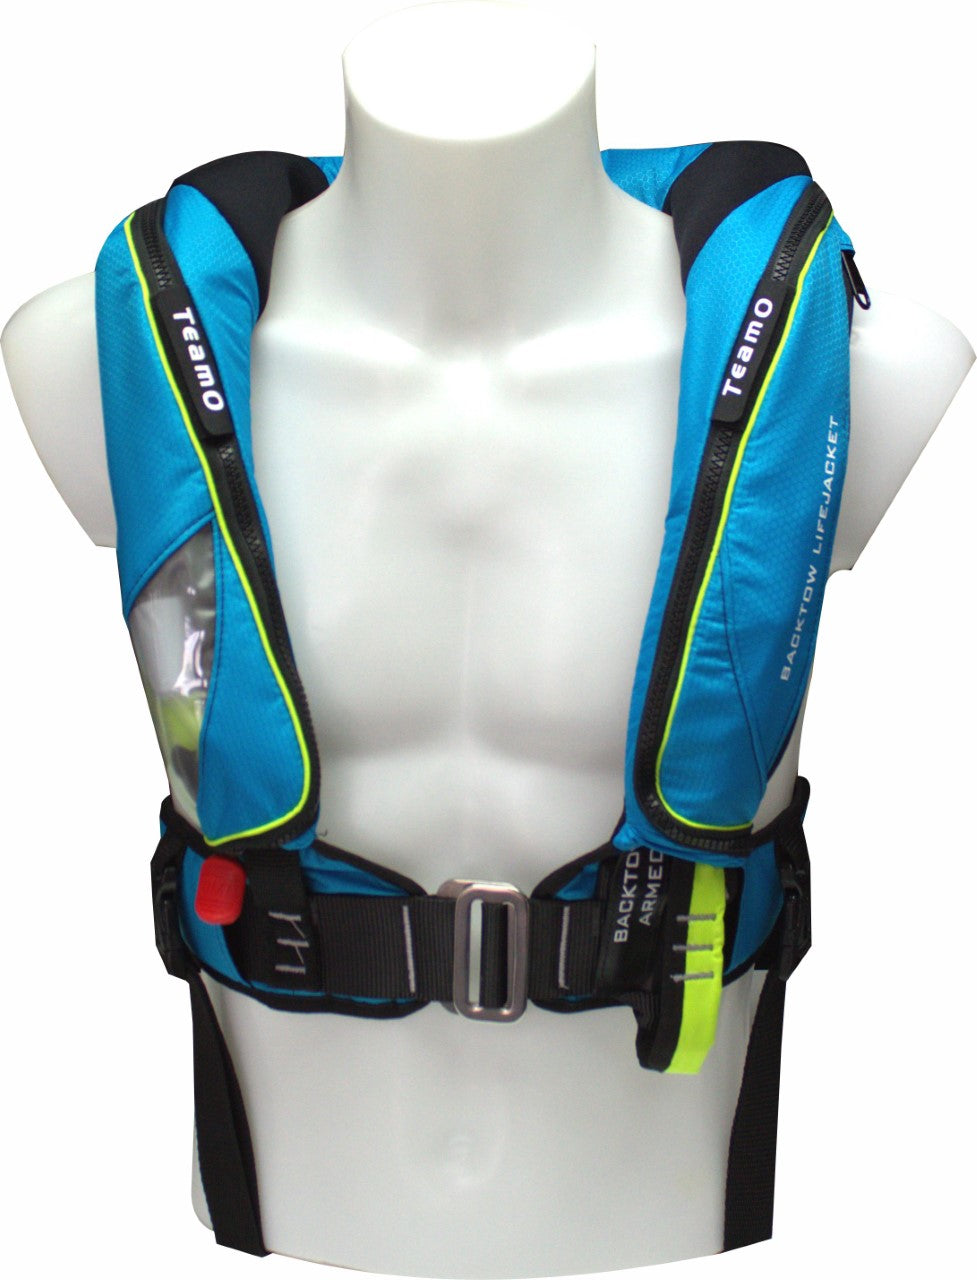 Extra Large Manual Inflatable Life Jacket Life Vest for Adults 275N Buoyancy